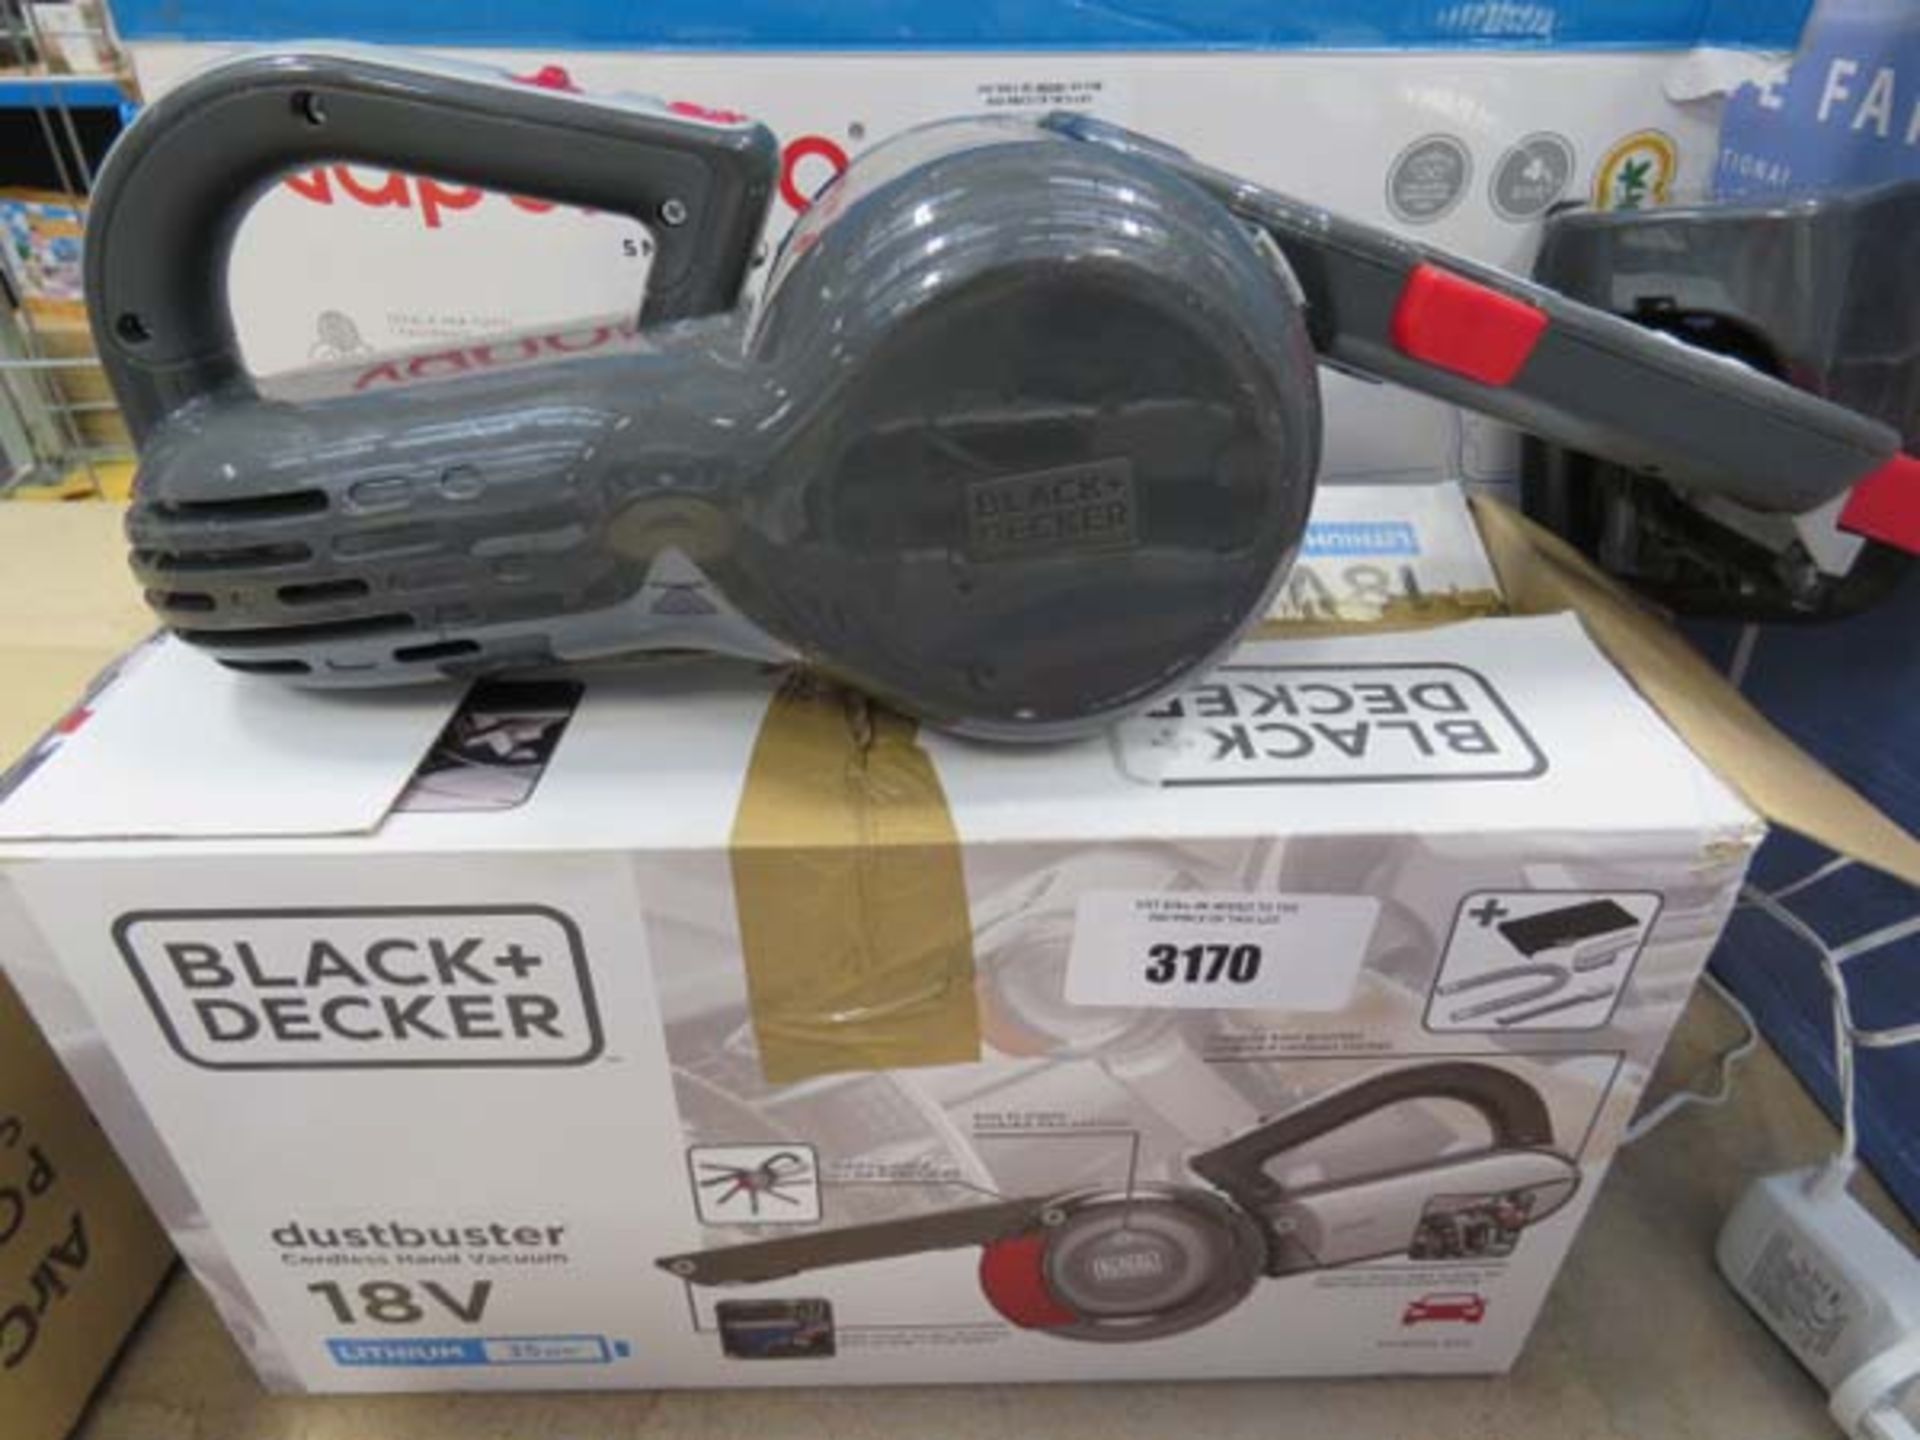 1 boxed and 1 unboxed Black and Decker 18v dustbusters